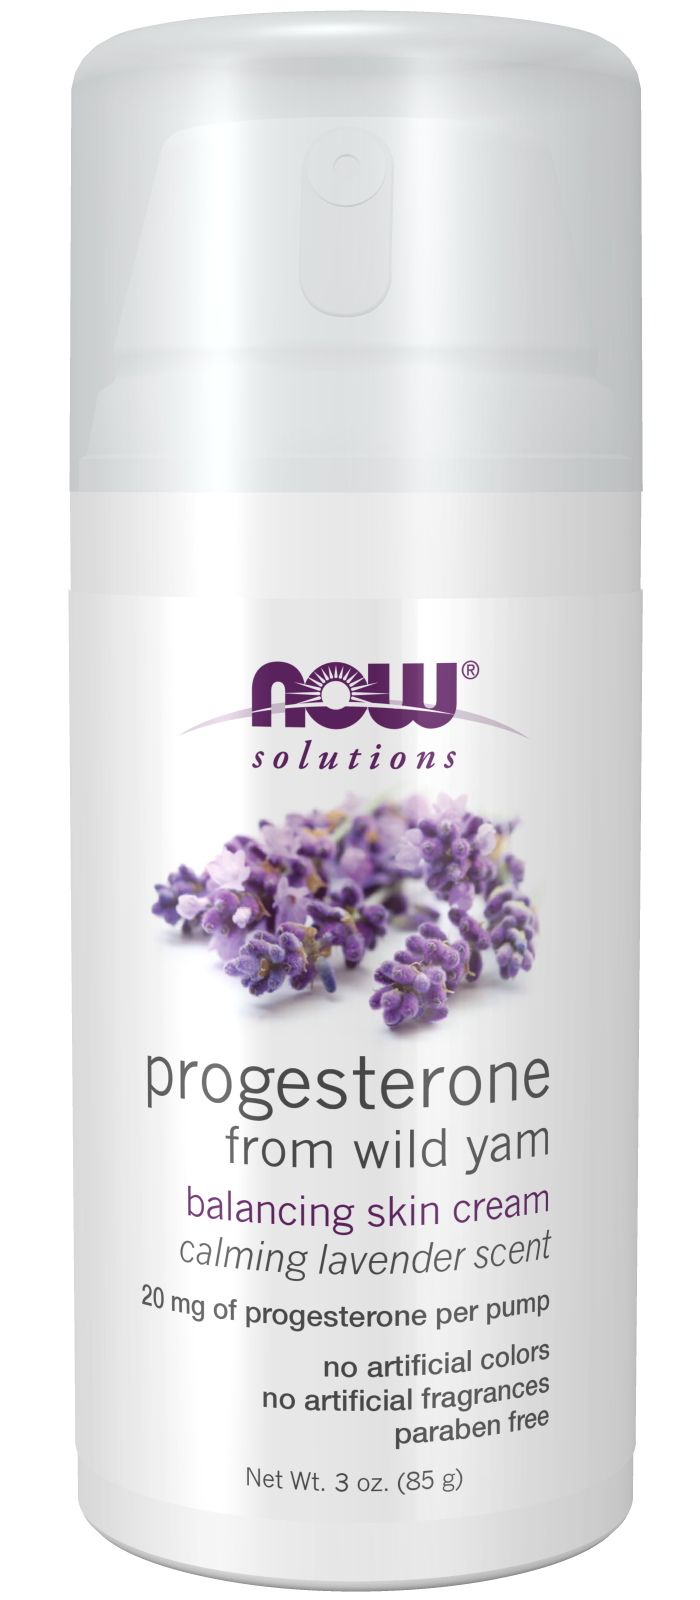 Progesterone from Wild Yam with Lavender Balancing Skin Cream – 3 oz. Bottle